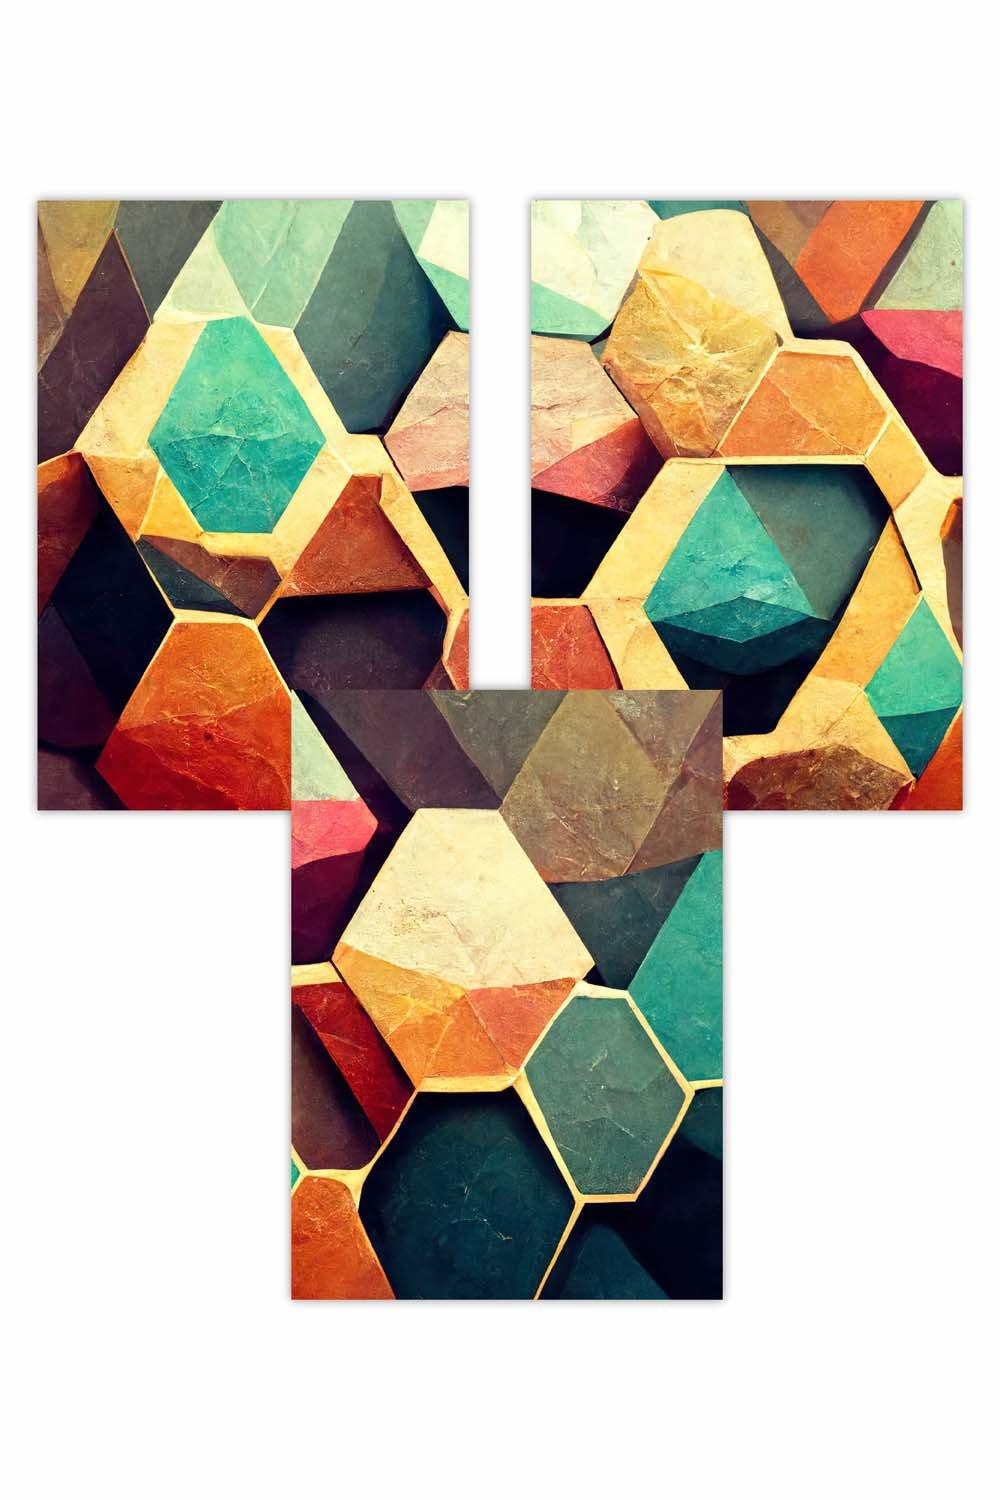 Set of 3 Geometric Abstract Colourful Hexagons Art Posters